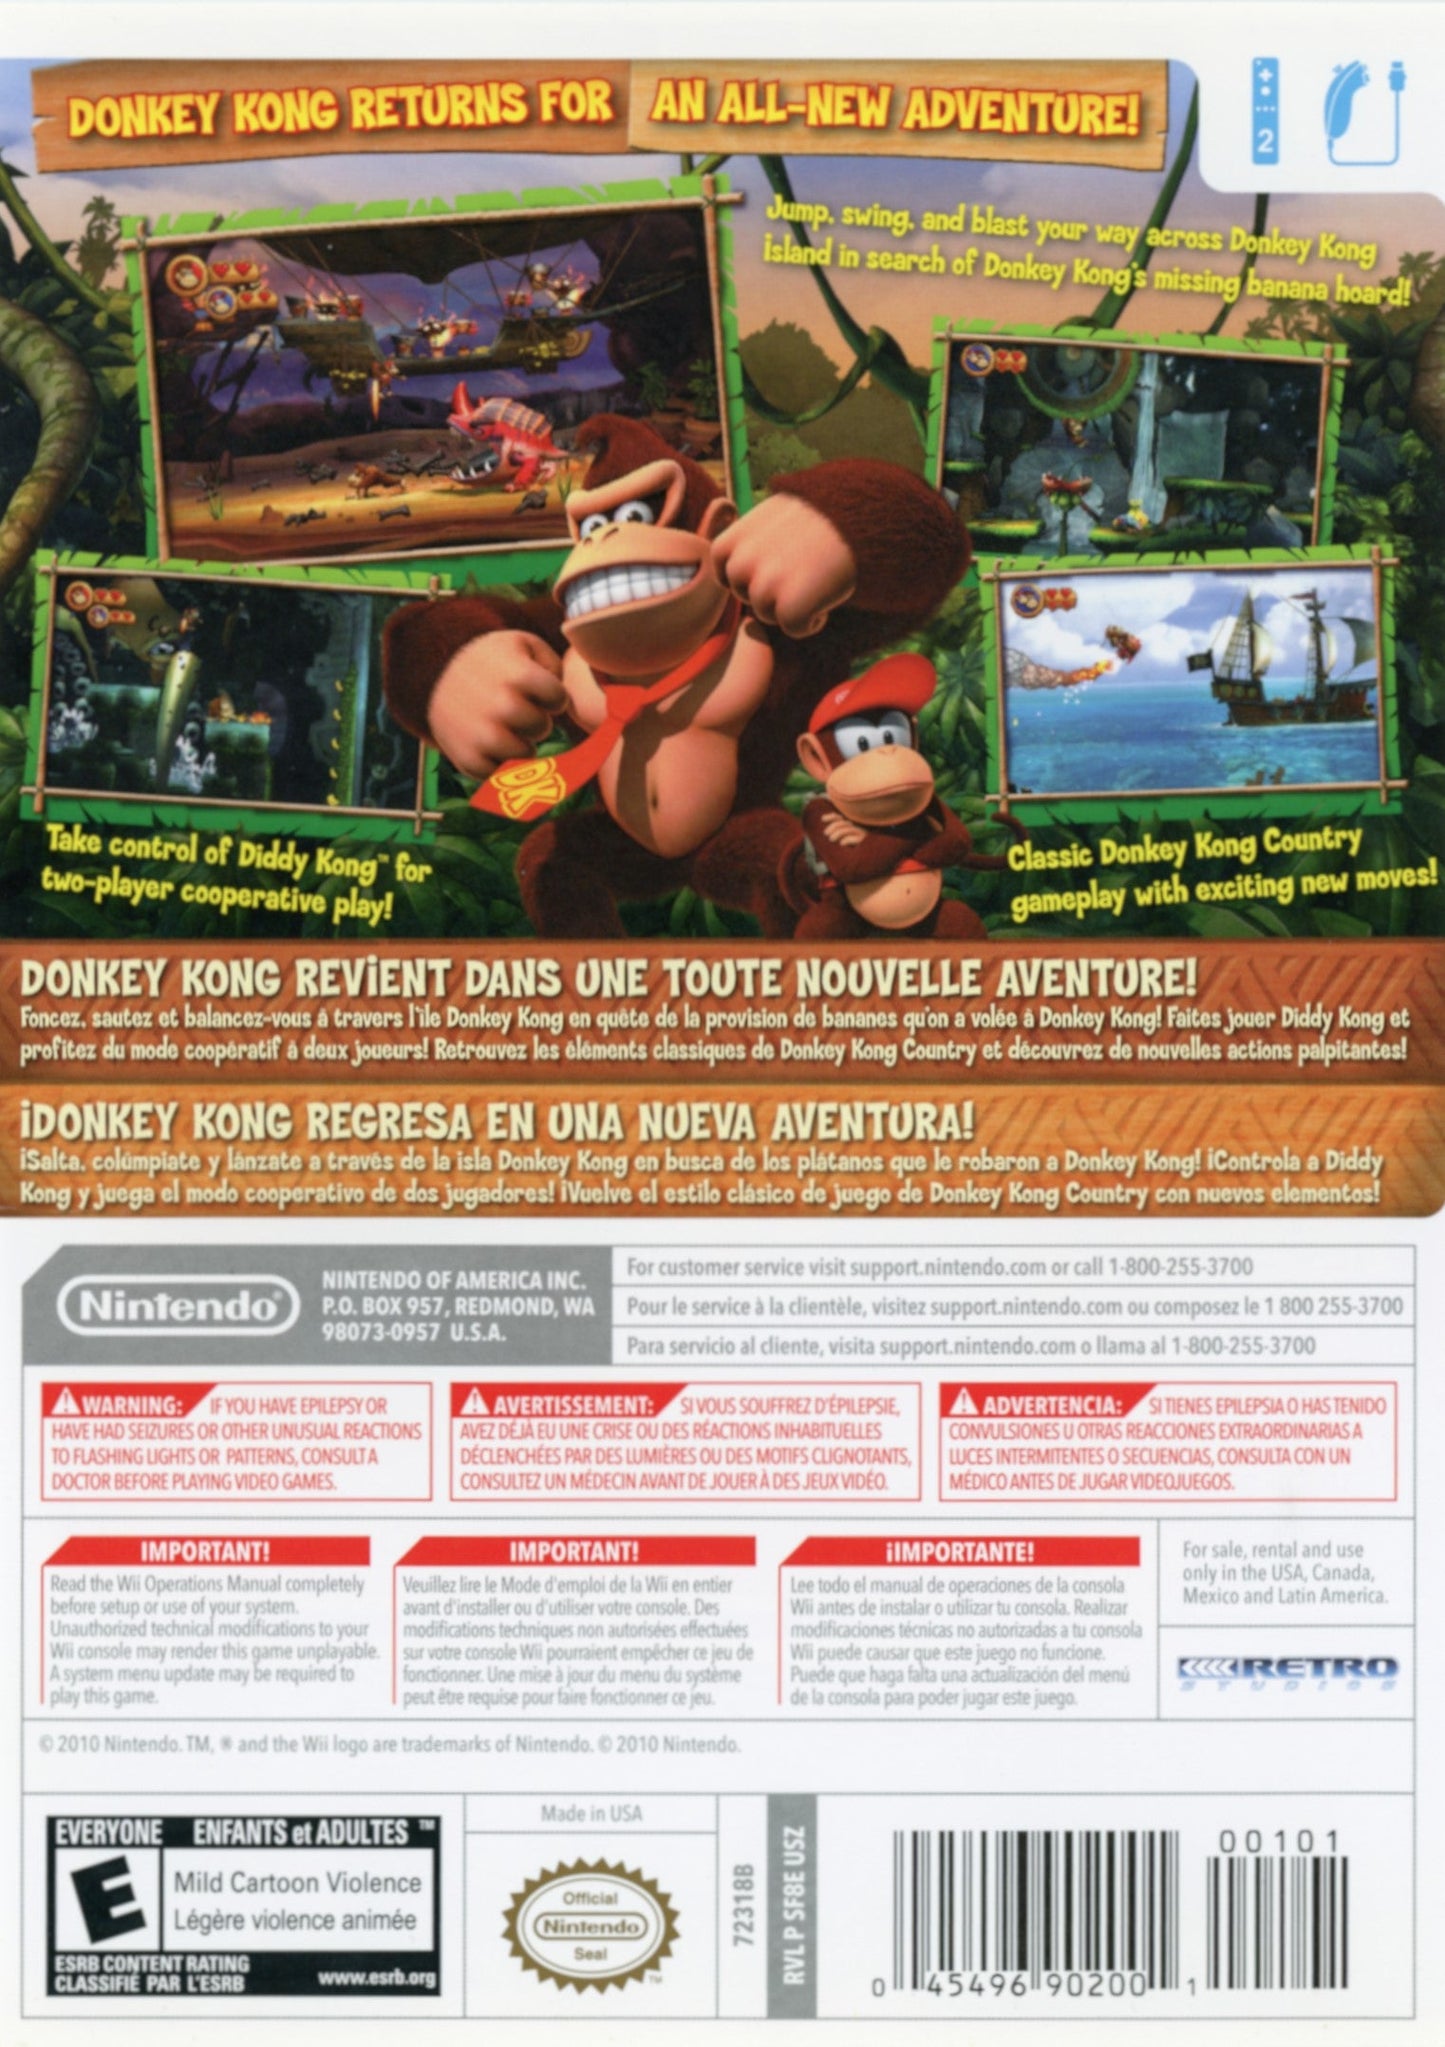 Incompatible Amplia gama Adaptar Donkey Kong Country Returns | Wii | CaveGamers